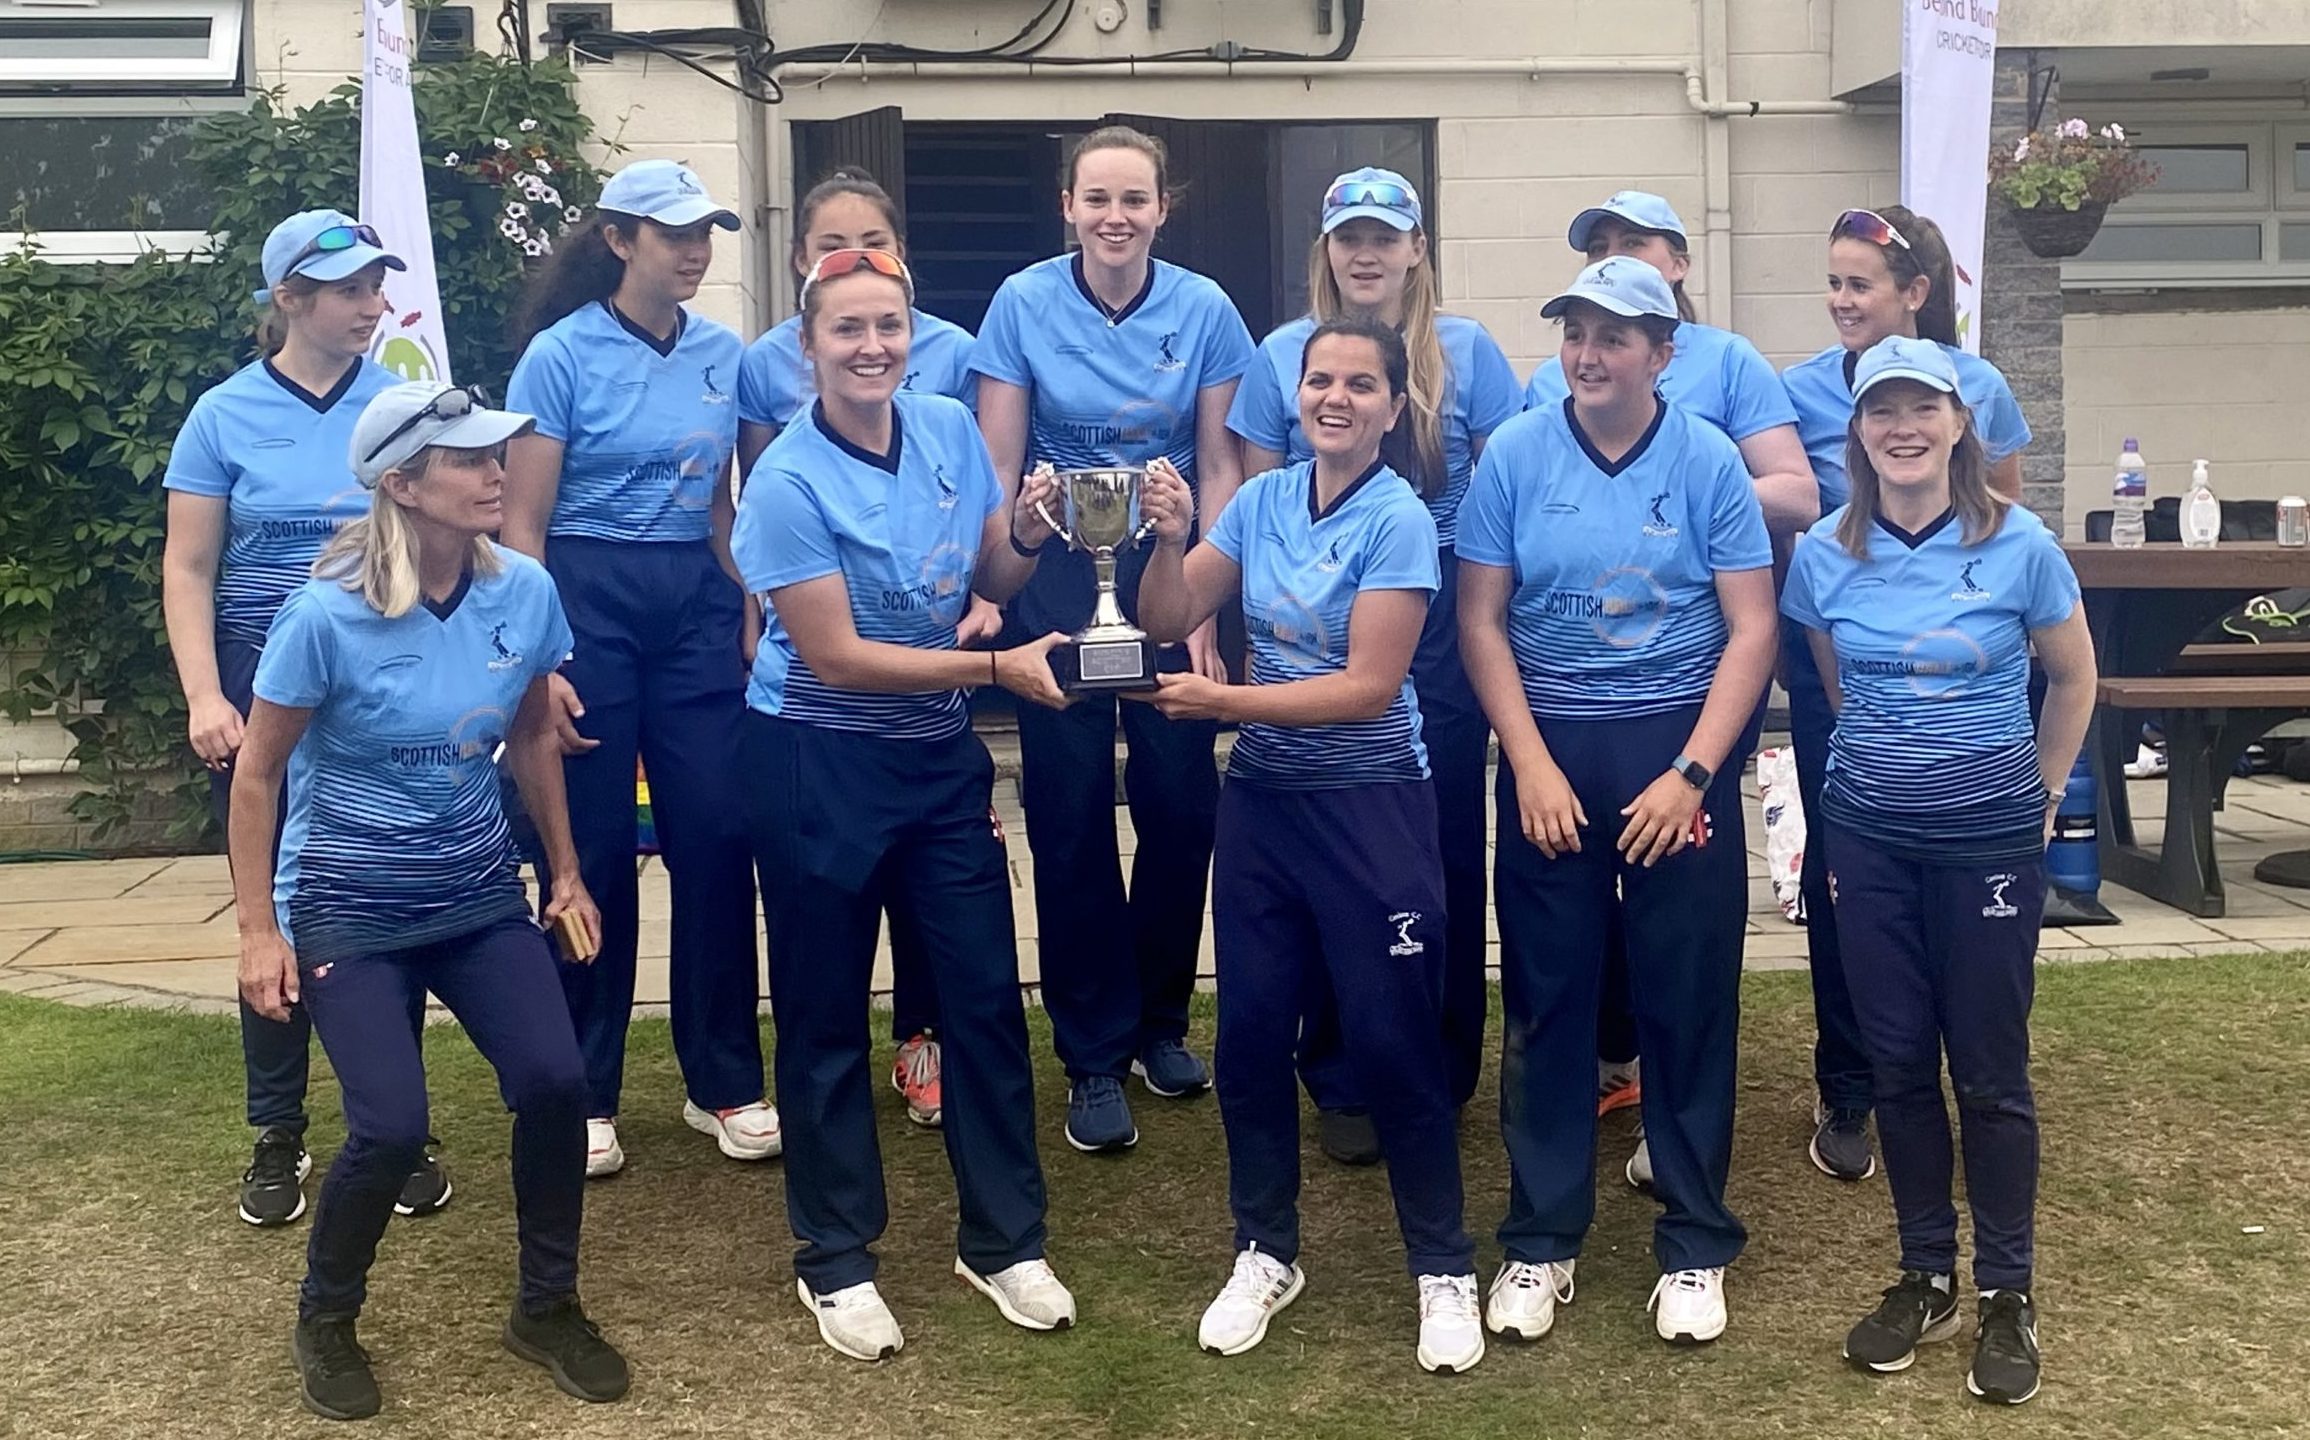 Carlton win Beyond Boundaries T20 Scottish Cup Final to complete women’s league & cup double